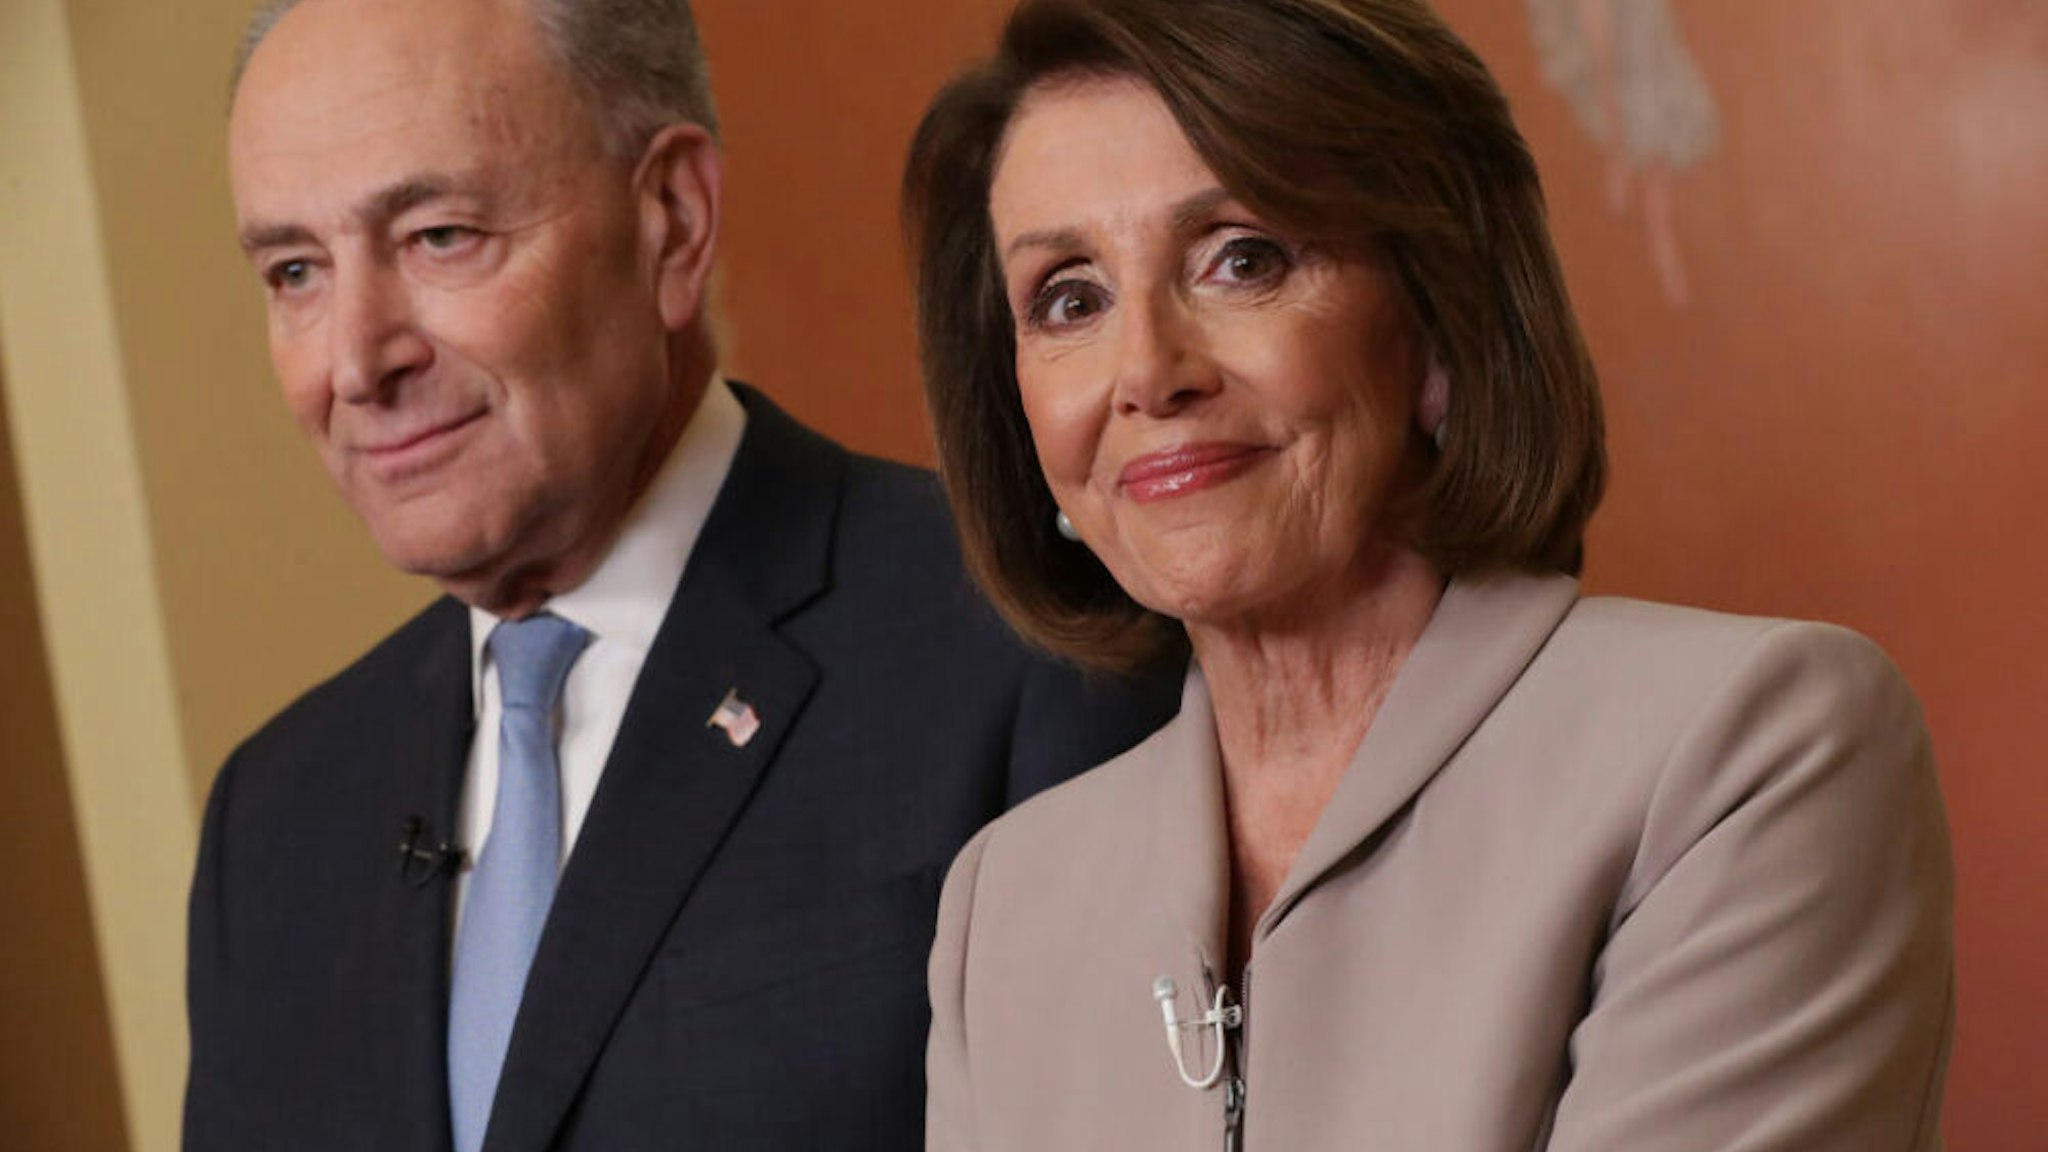 WASHINGTON, DC - JANUARY 08: Speaker of the House Nancy Pelosi (D-CA) and Senate Minority Leader Charles Schumer (D-NY) pose for photographs after delivering a televised response to President Donald Trump's national address about border security at the U.S. Capitol January 08, 2019 in Washington, DC. Republicans and Democrats seem no closer to an agreement on security along the southern border and ending the partial federal government shutdown, the second-longest in history.